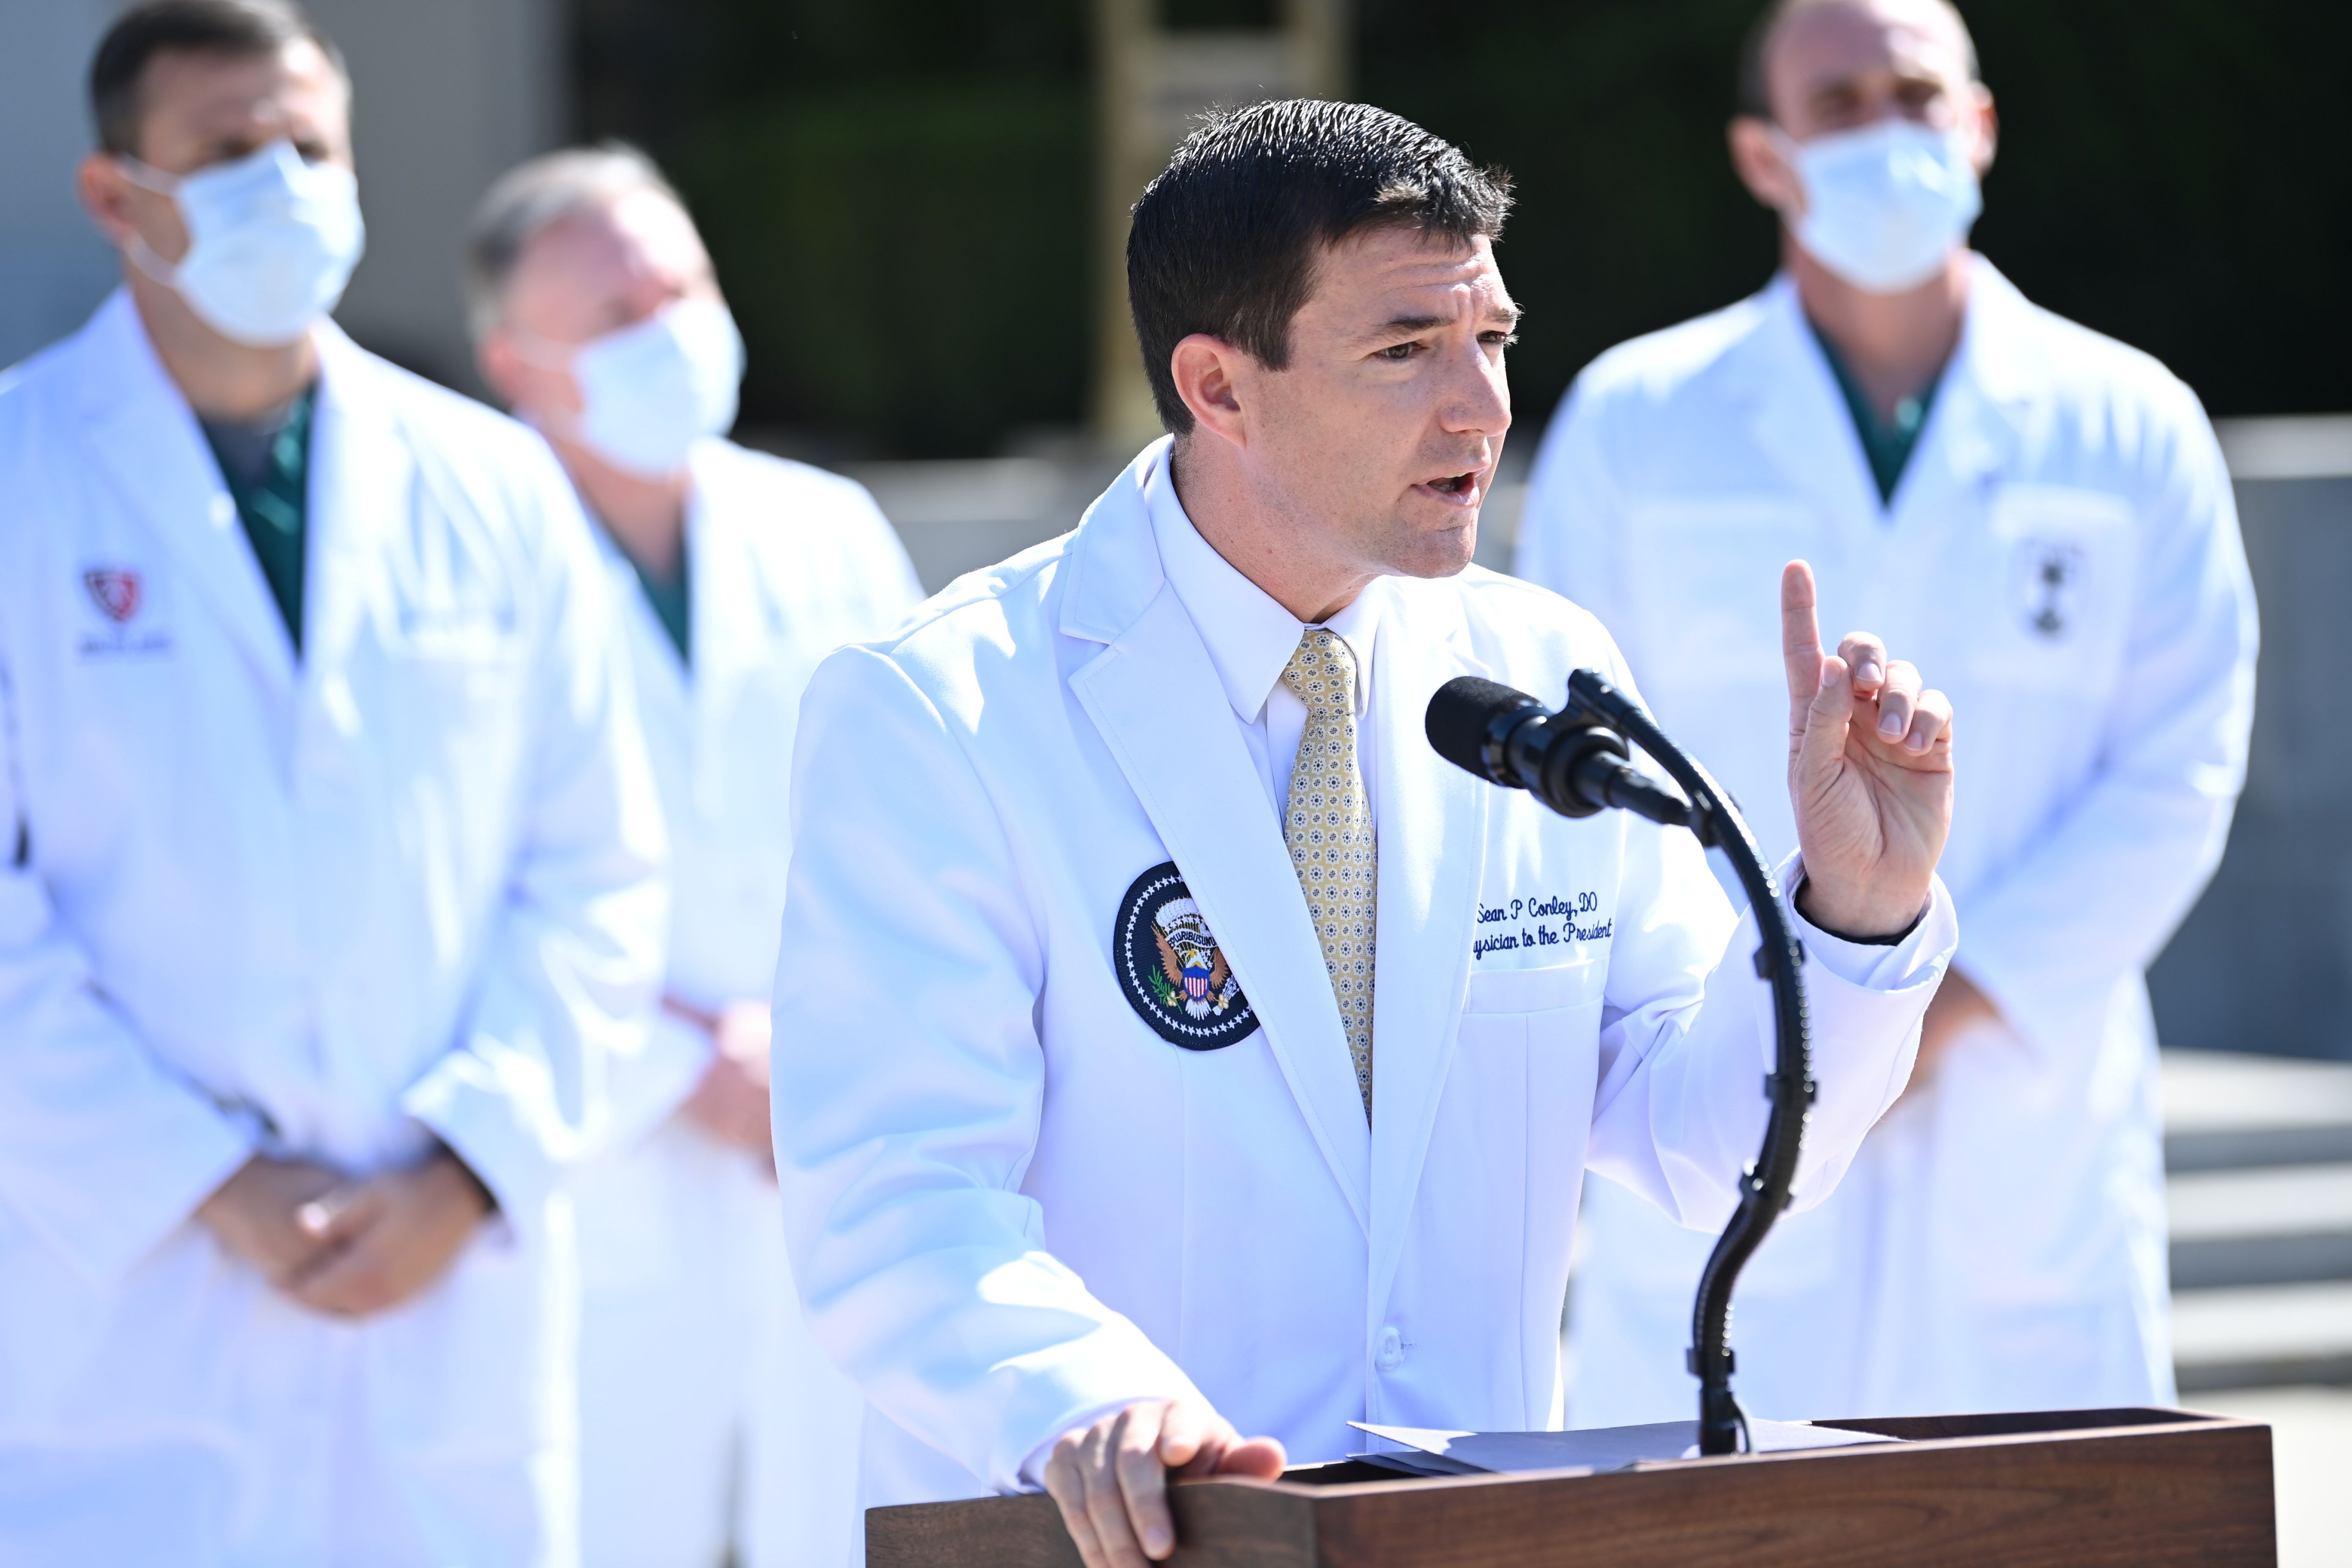 White House physician Sean Conley answers questions surrounded by other doctors, during an update on the condition of US President Donald Trump, on October 4, at Walter Reed Medical Center in Bethesda, Maryland. (BRENDAN SMIALOWSKI / Contributor)